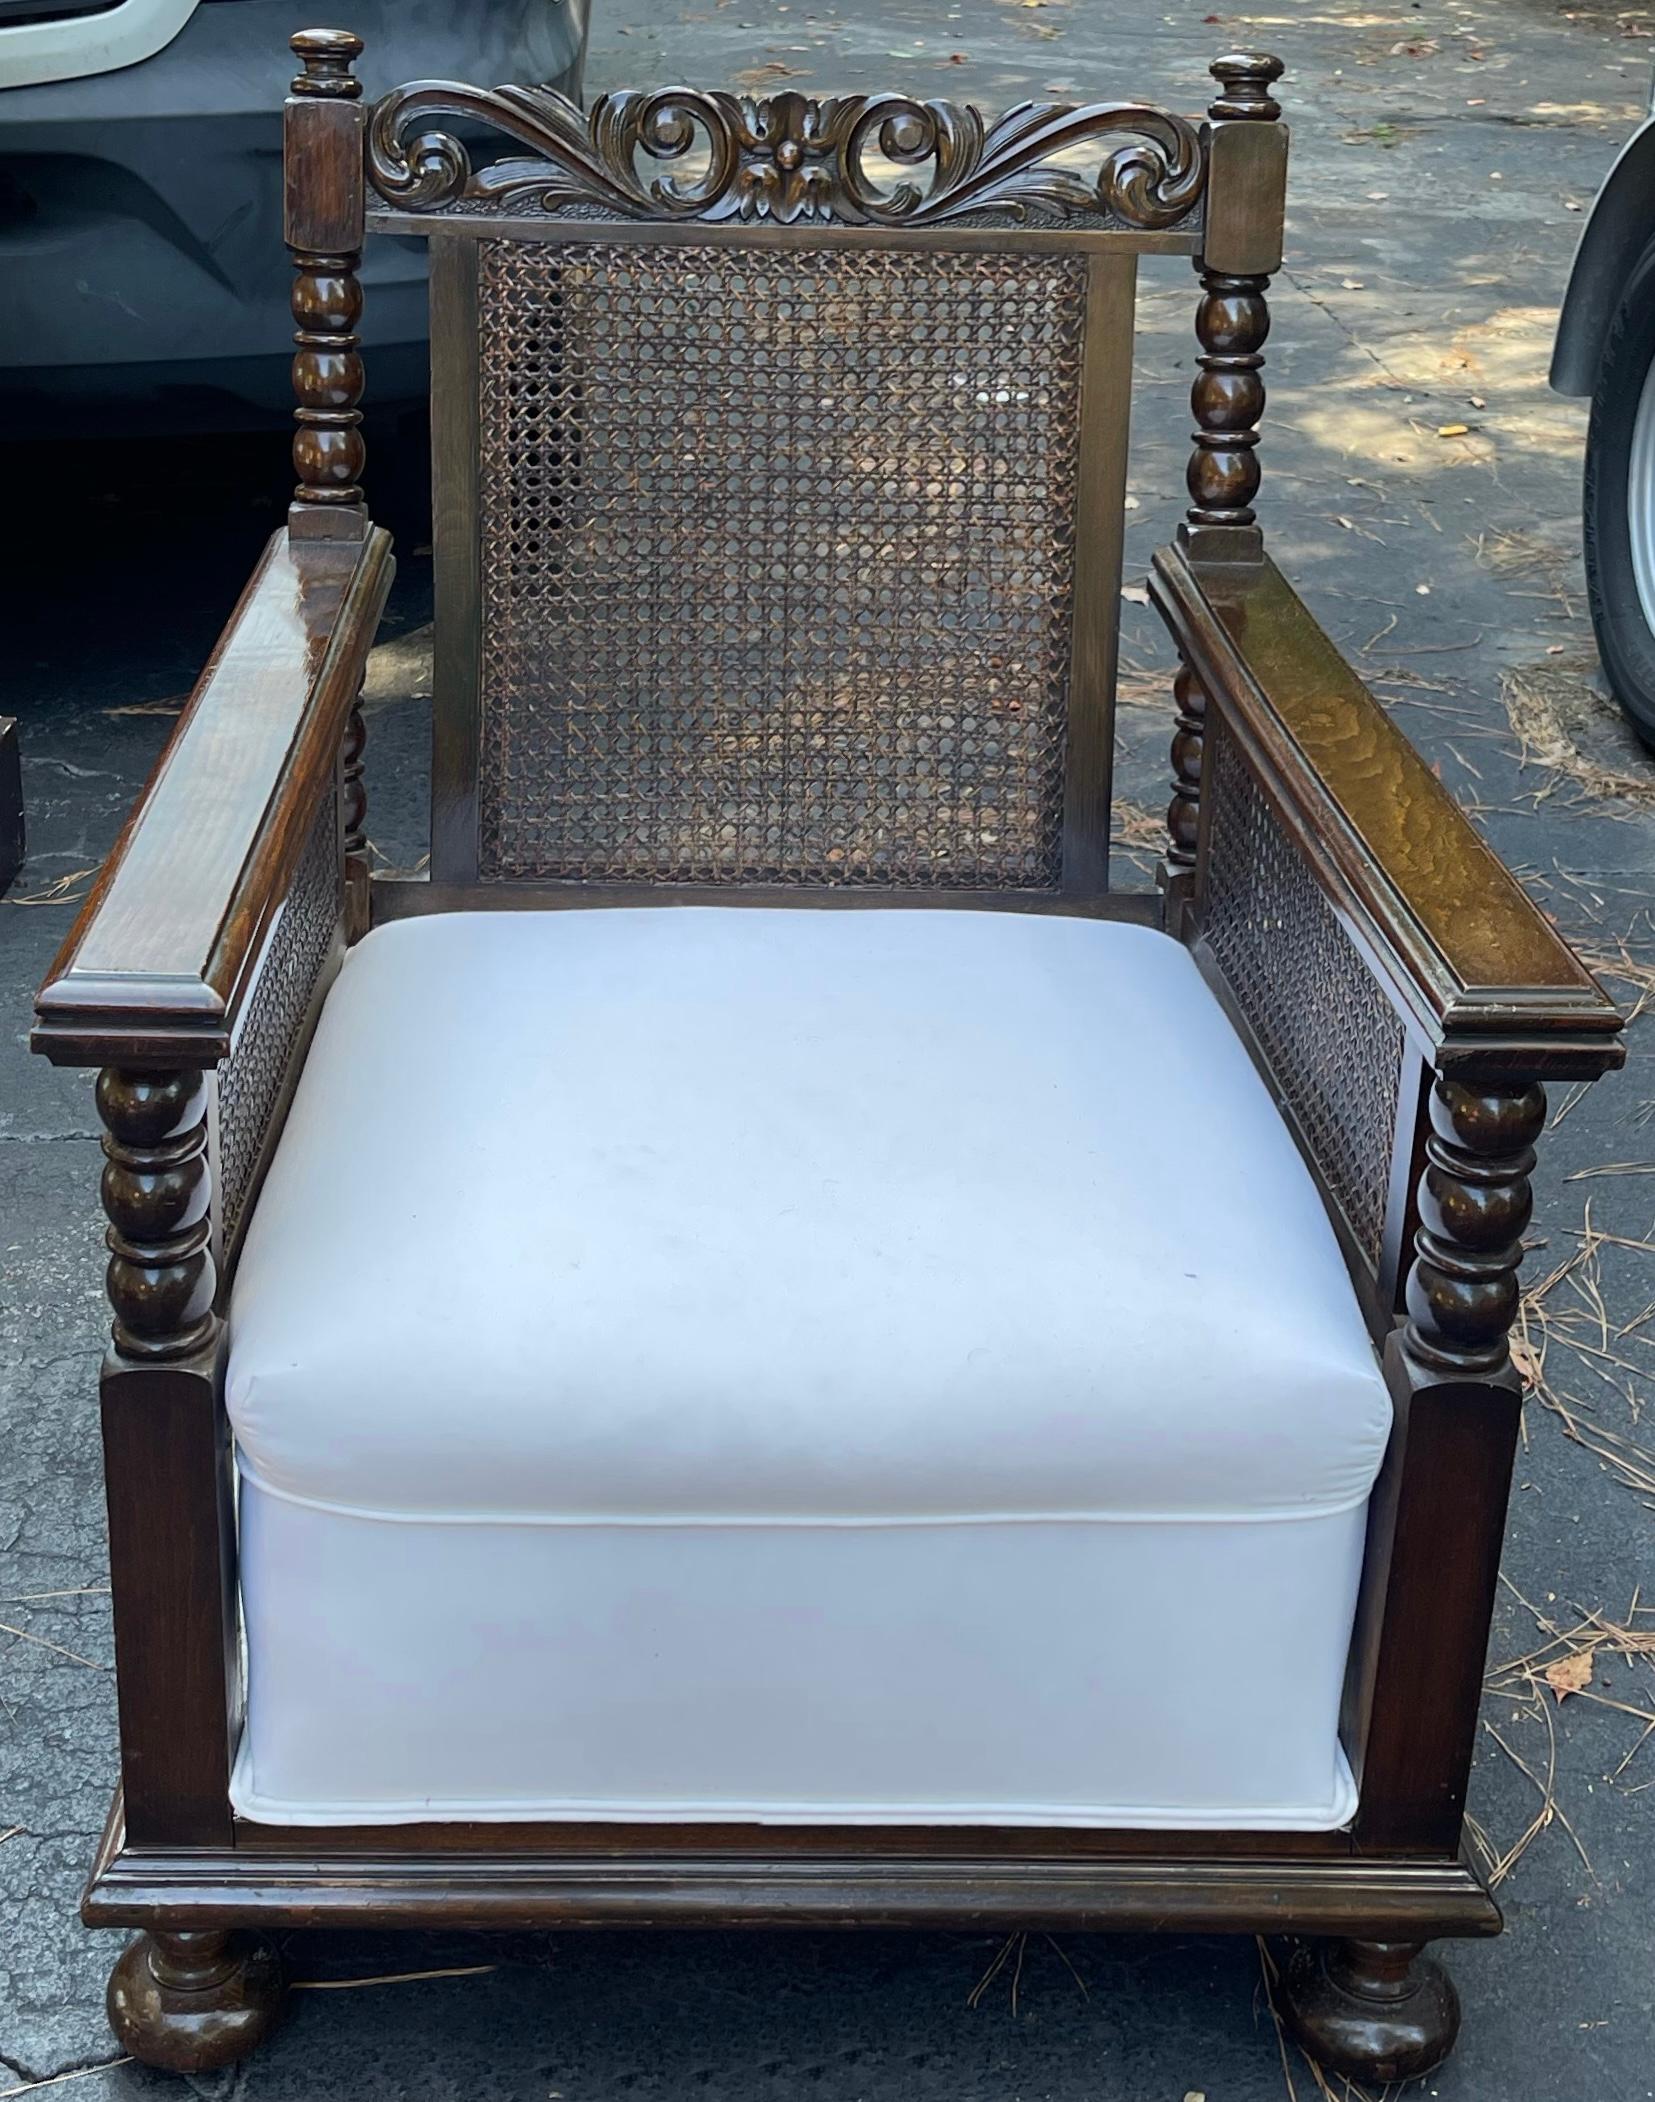 This is a pair of English British Colonial style carved oak and cane back club chairs. The white cotton upholstery is vintage but in good condition. The chairs include a loose back cushion and pillow. See the coordinating sofa. 

One can panel